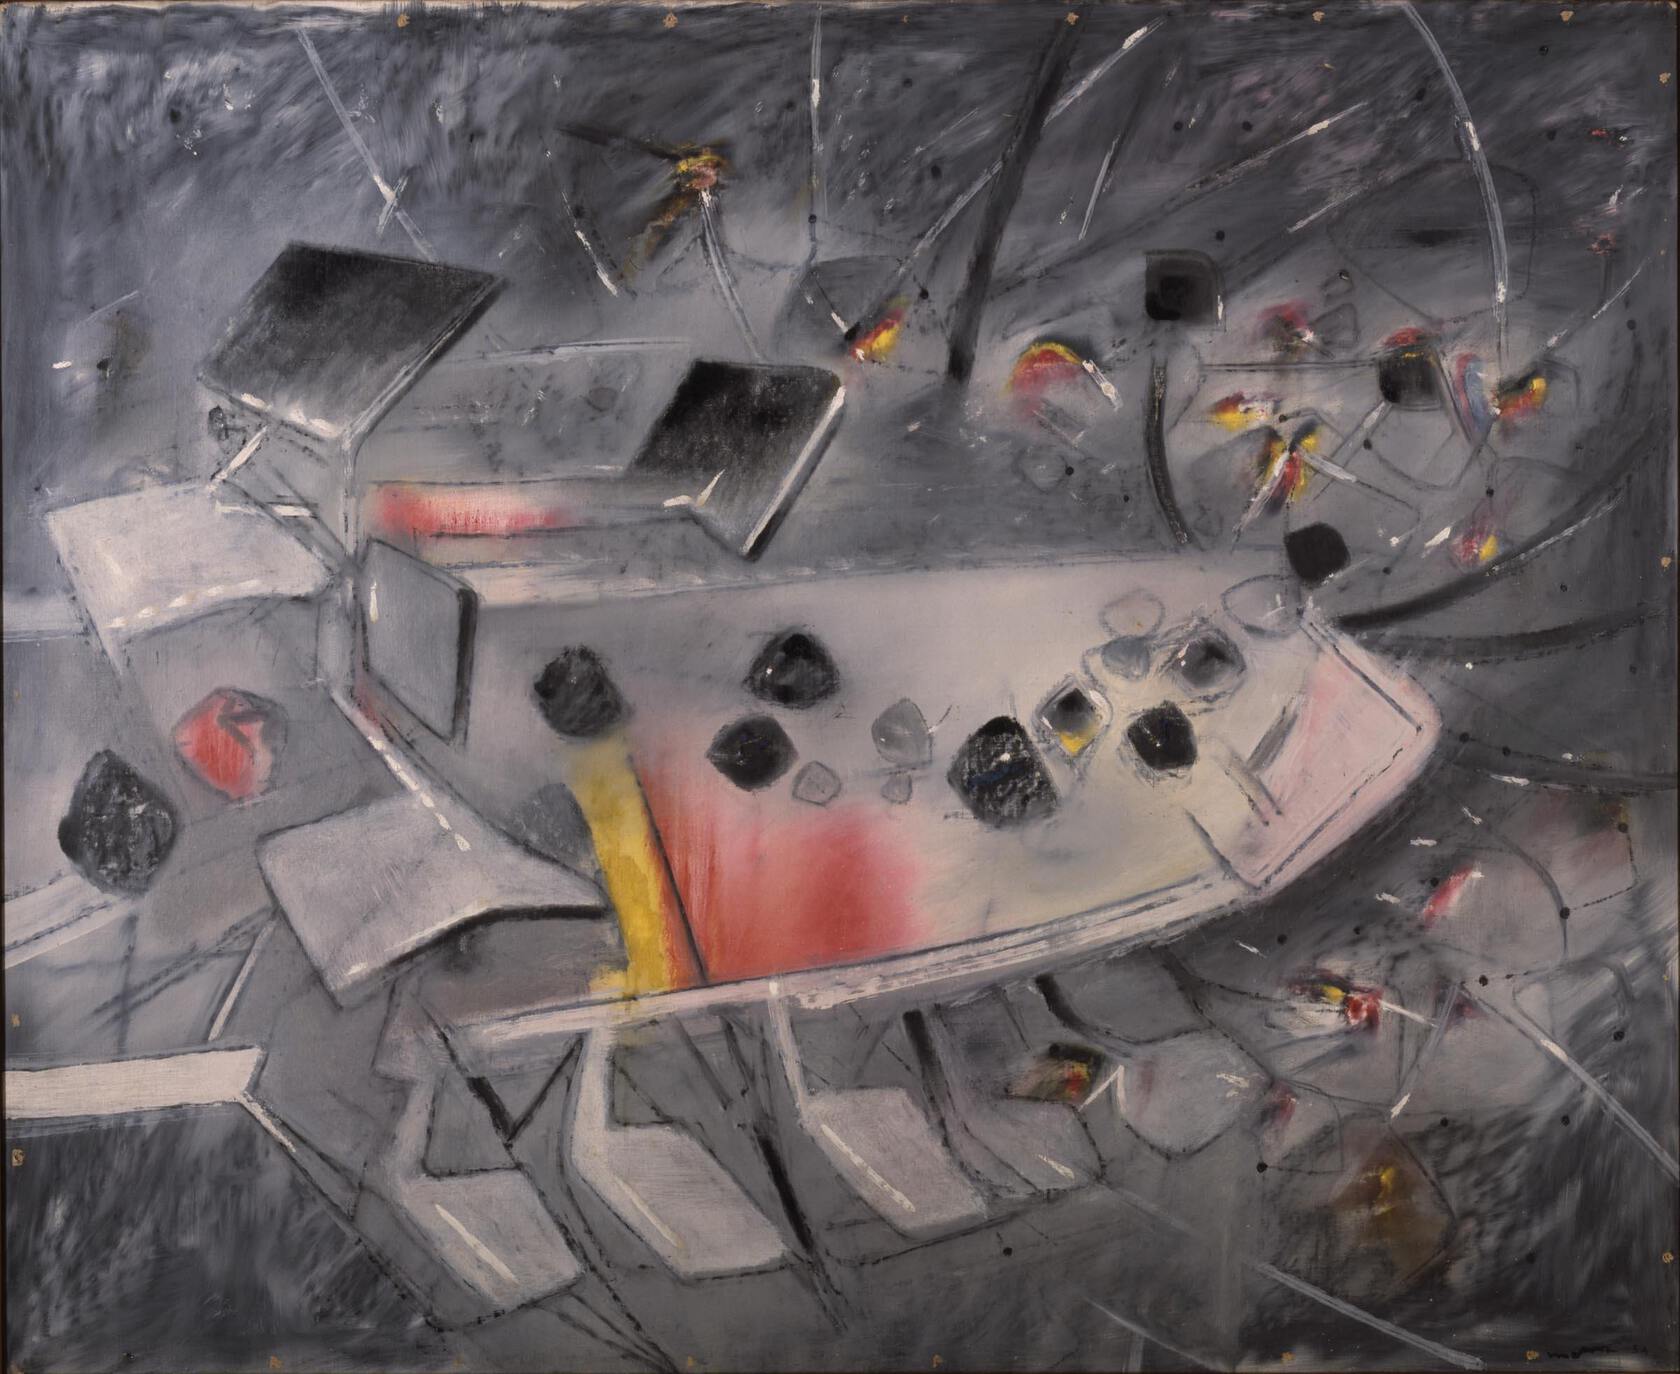 Painting titled: the continuous miner by Roberto Matta